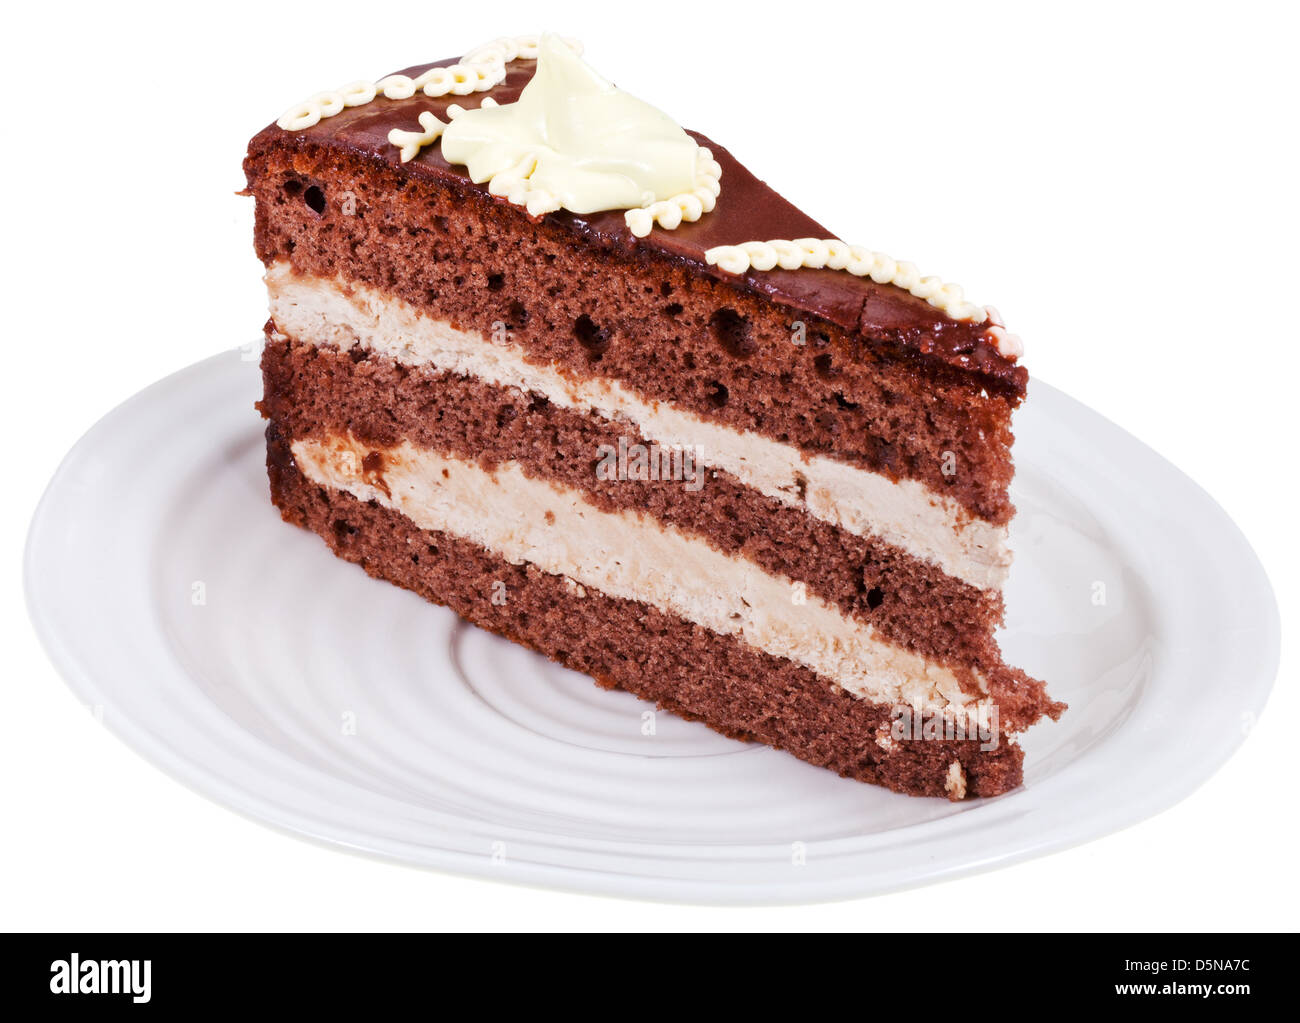 chocolate cake piece on plate isolated on white background Stock Photo